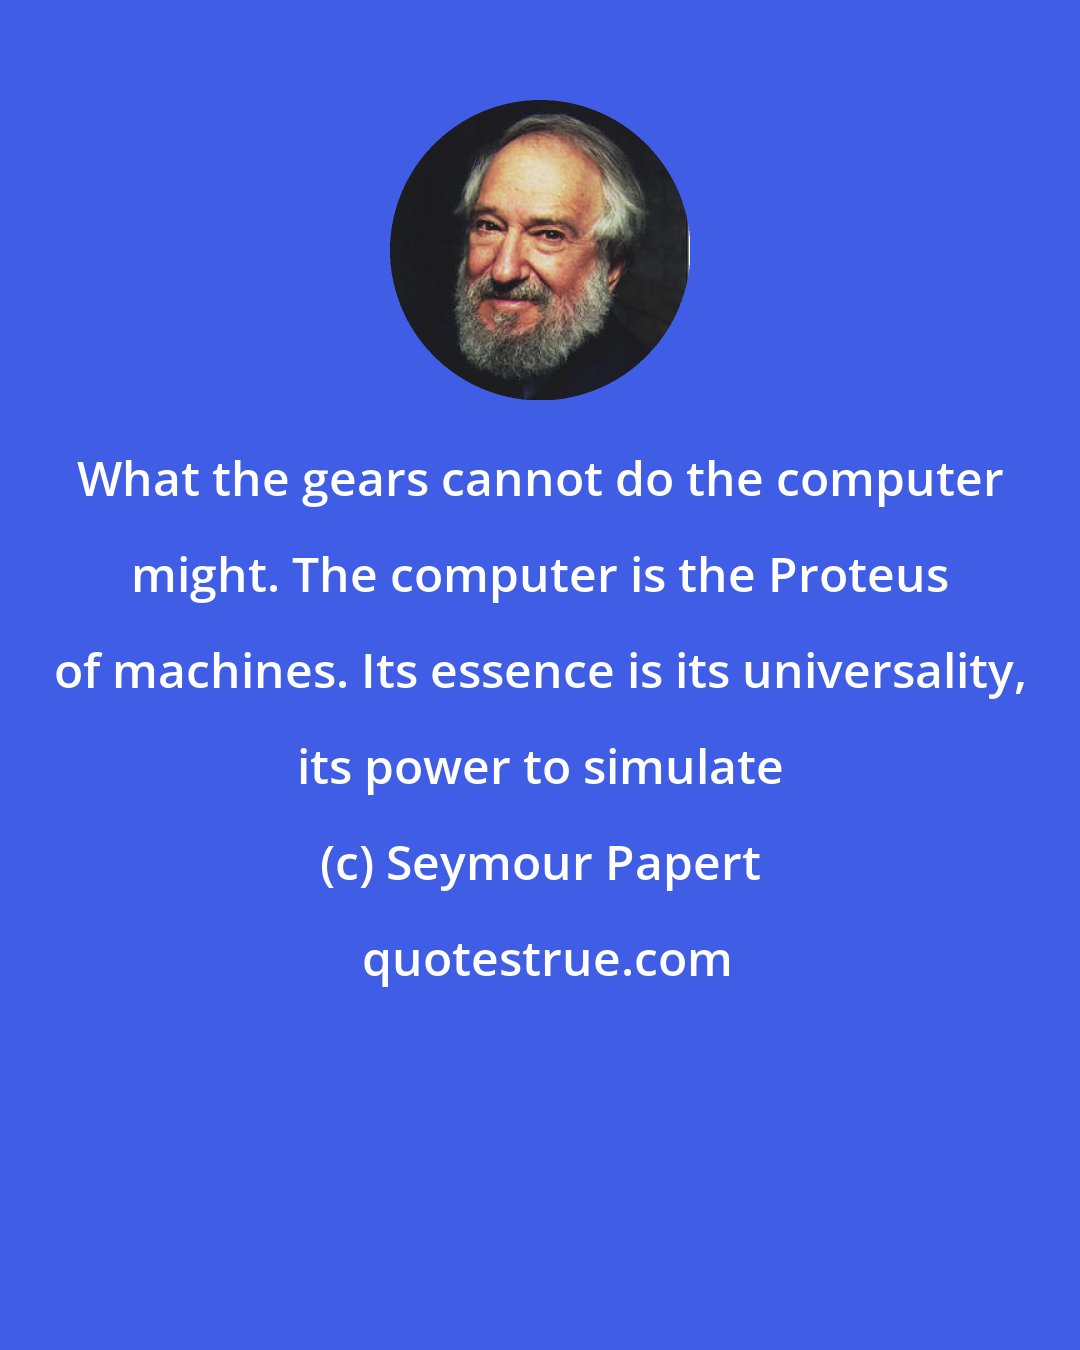 Seymour Papert: What the gears cannot do the computer might. The computer is the Proteus of machines. Its essence is its universality, its power to simulate